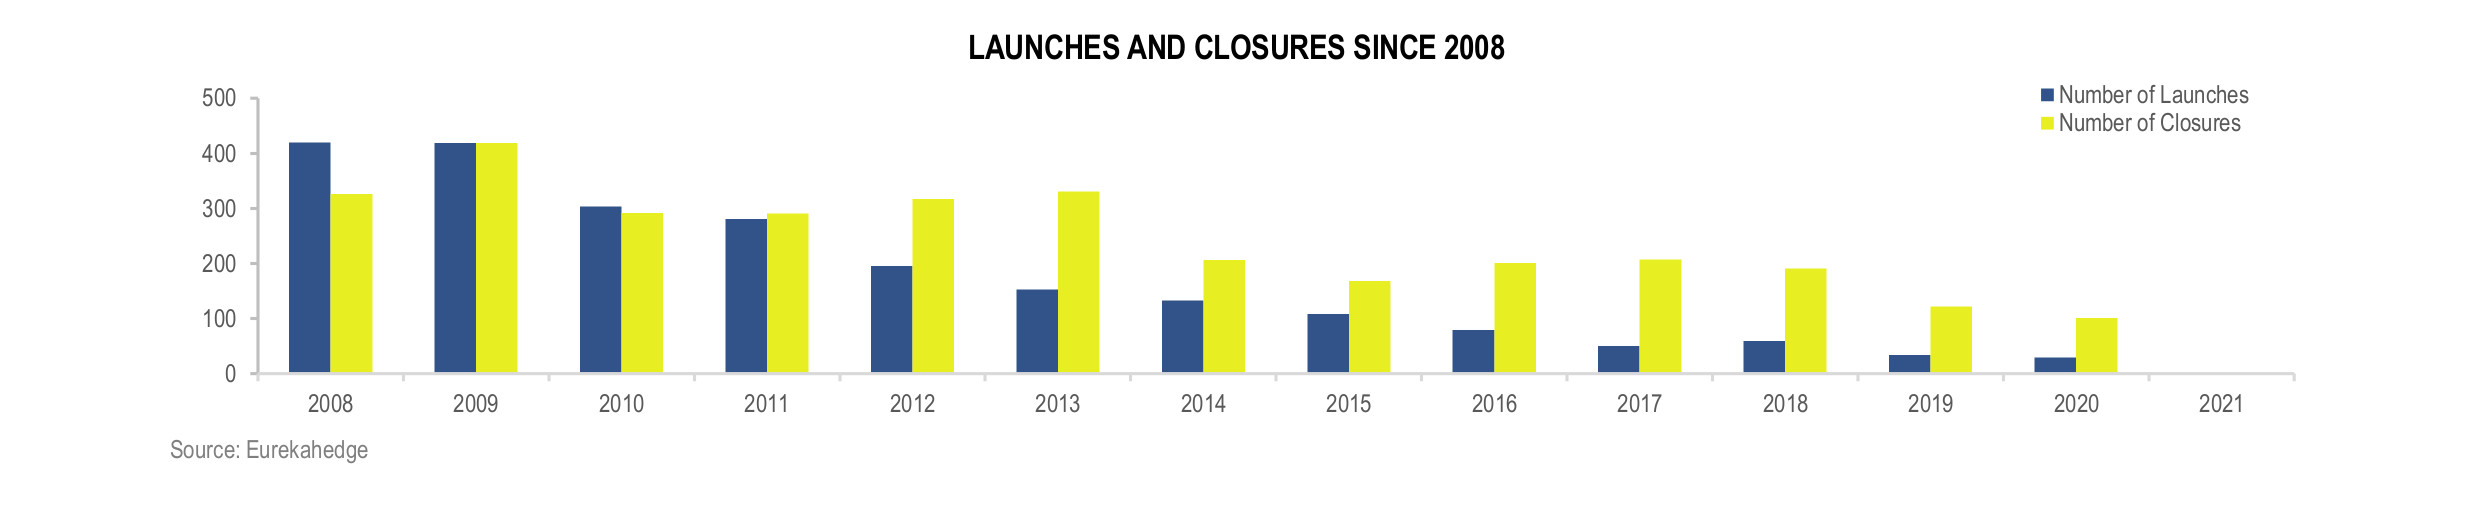 Fund of Hedge Funds Infographic March 2021 - Launches and Closures